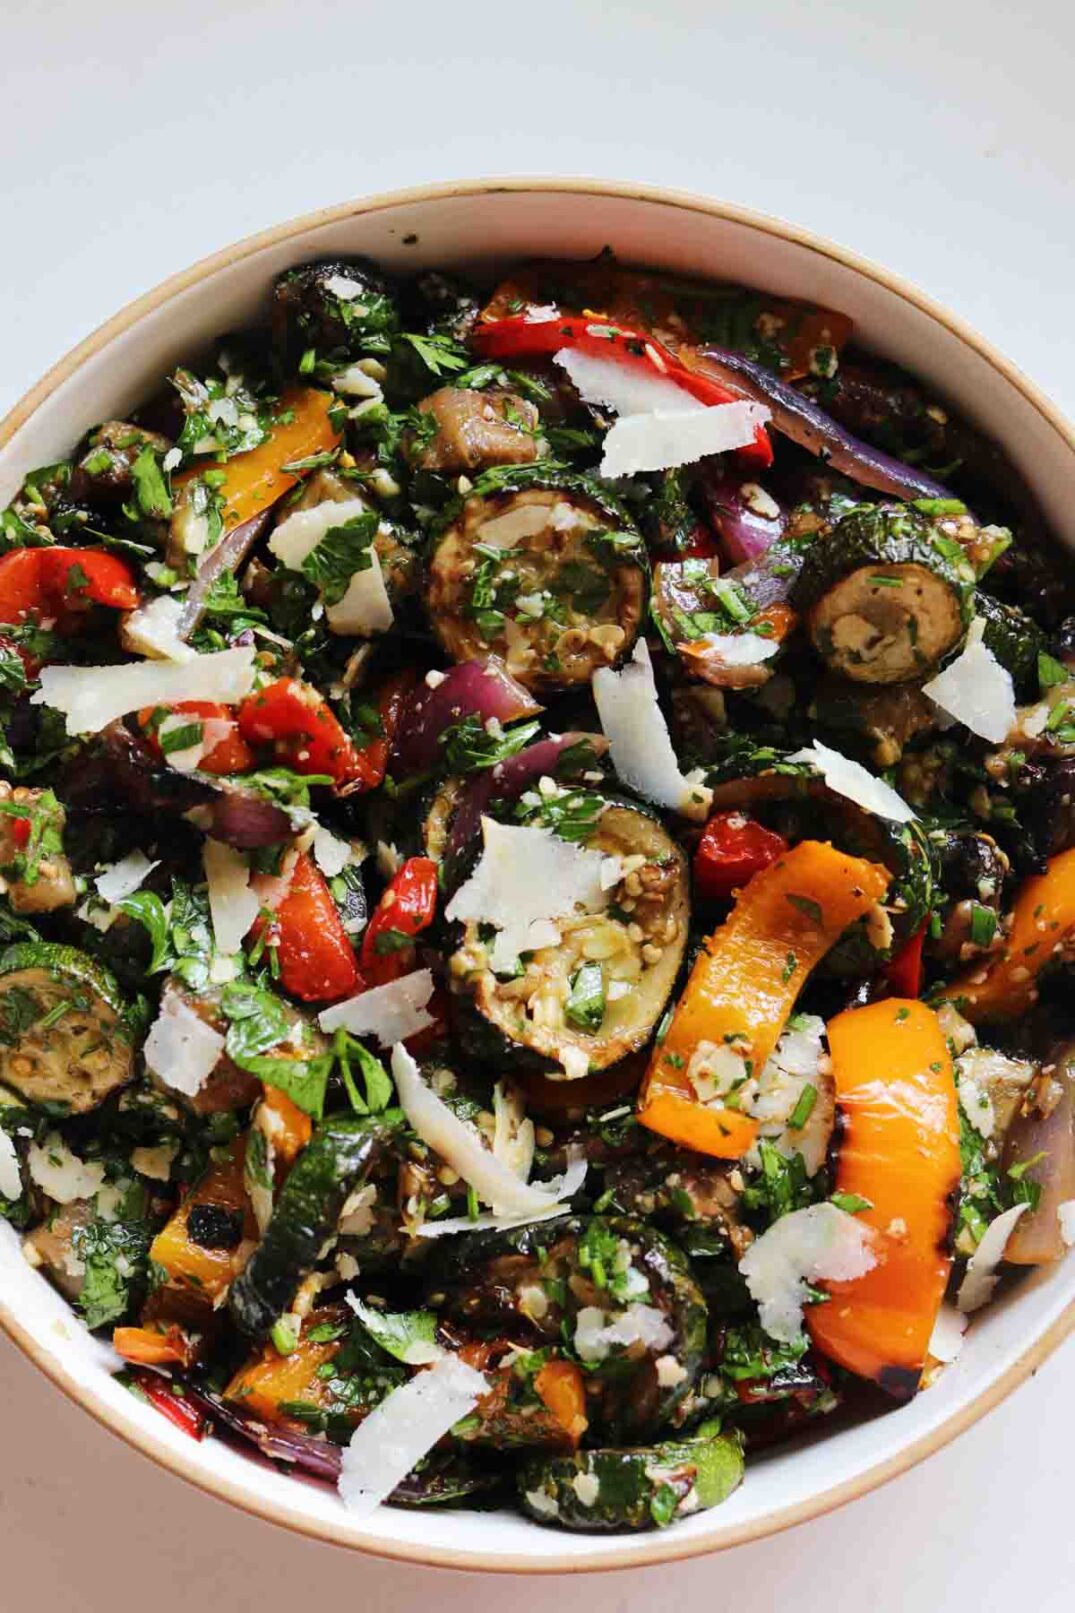 a bowl of colorful grilled vegetables tossed in bright green chimichurri sauce.